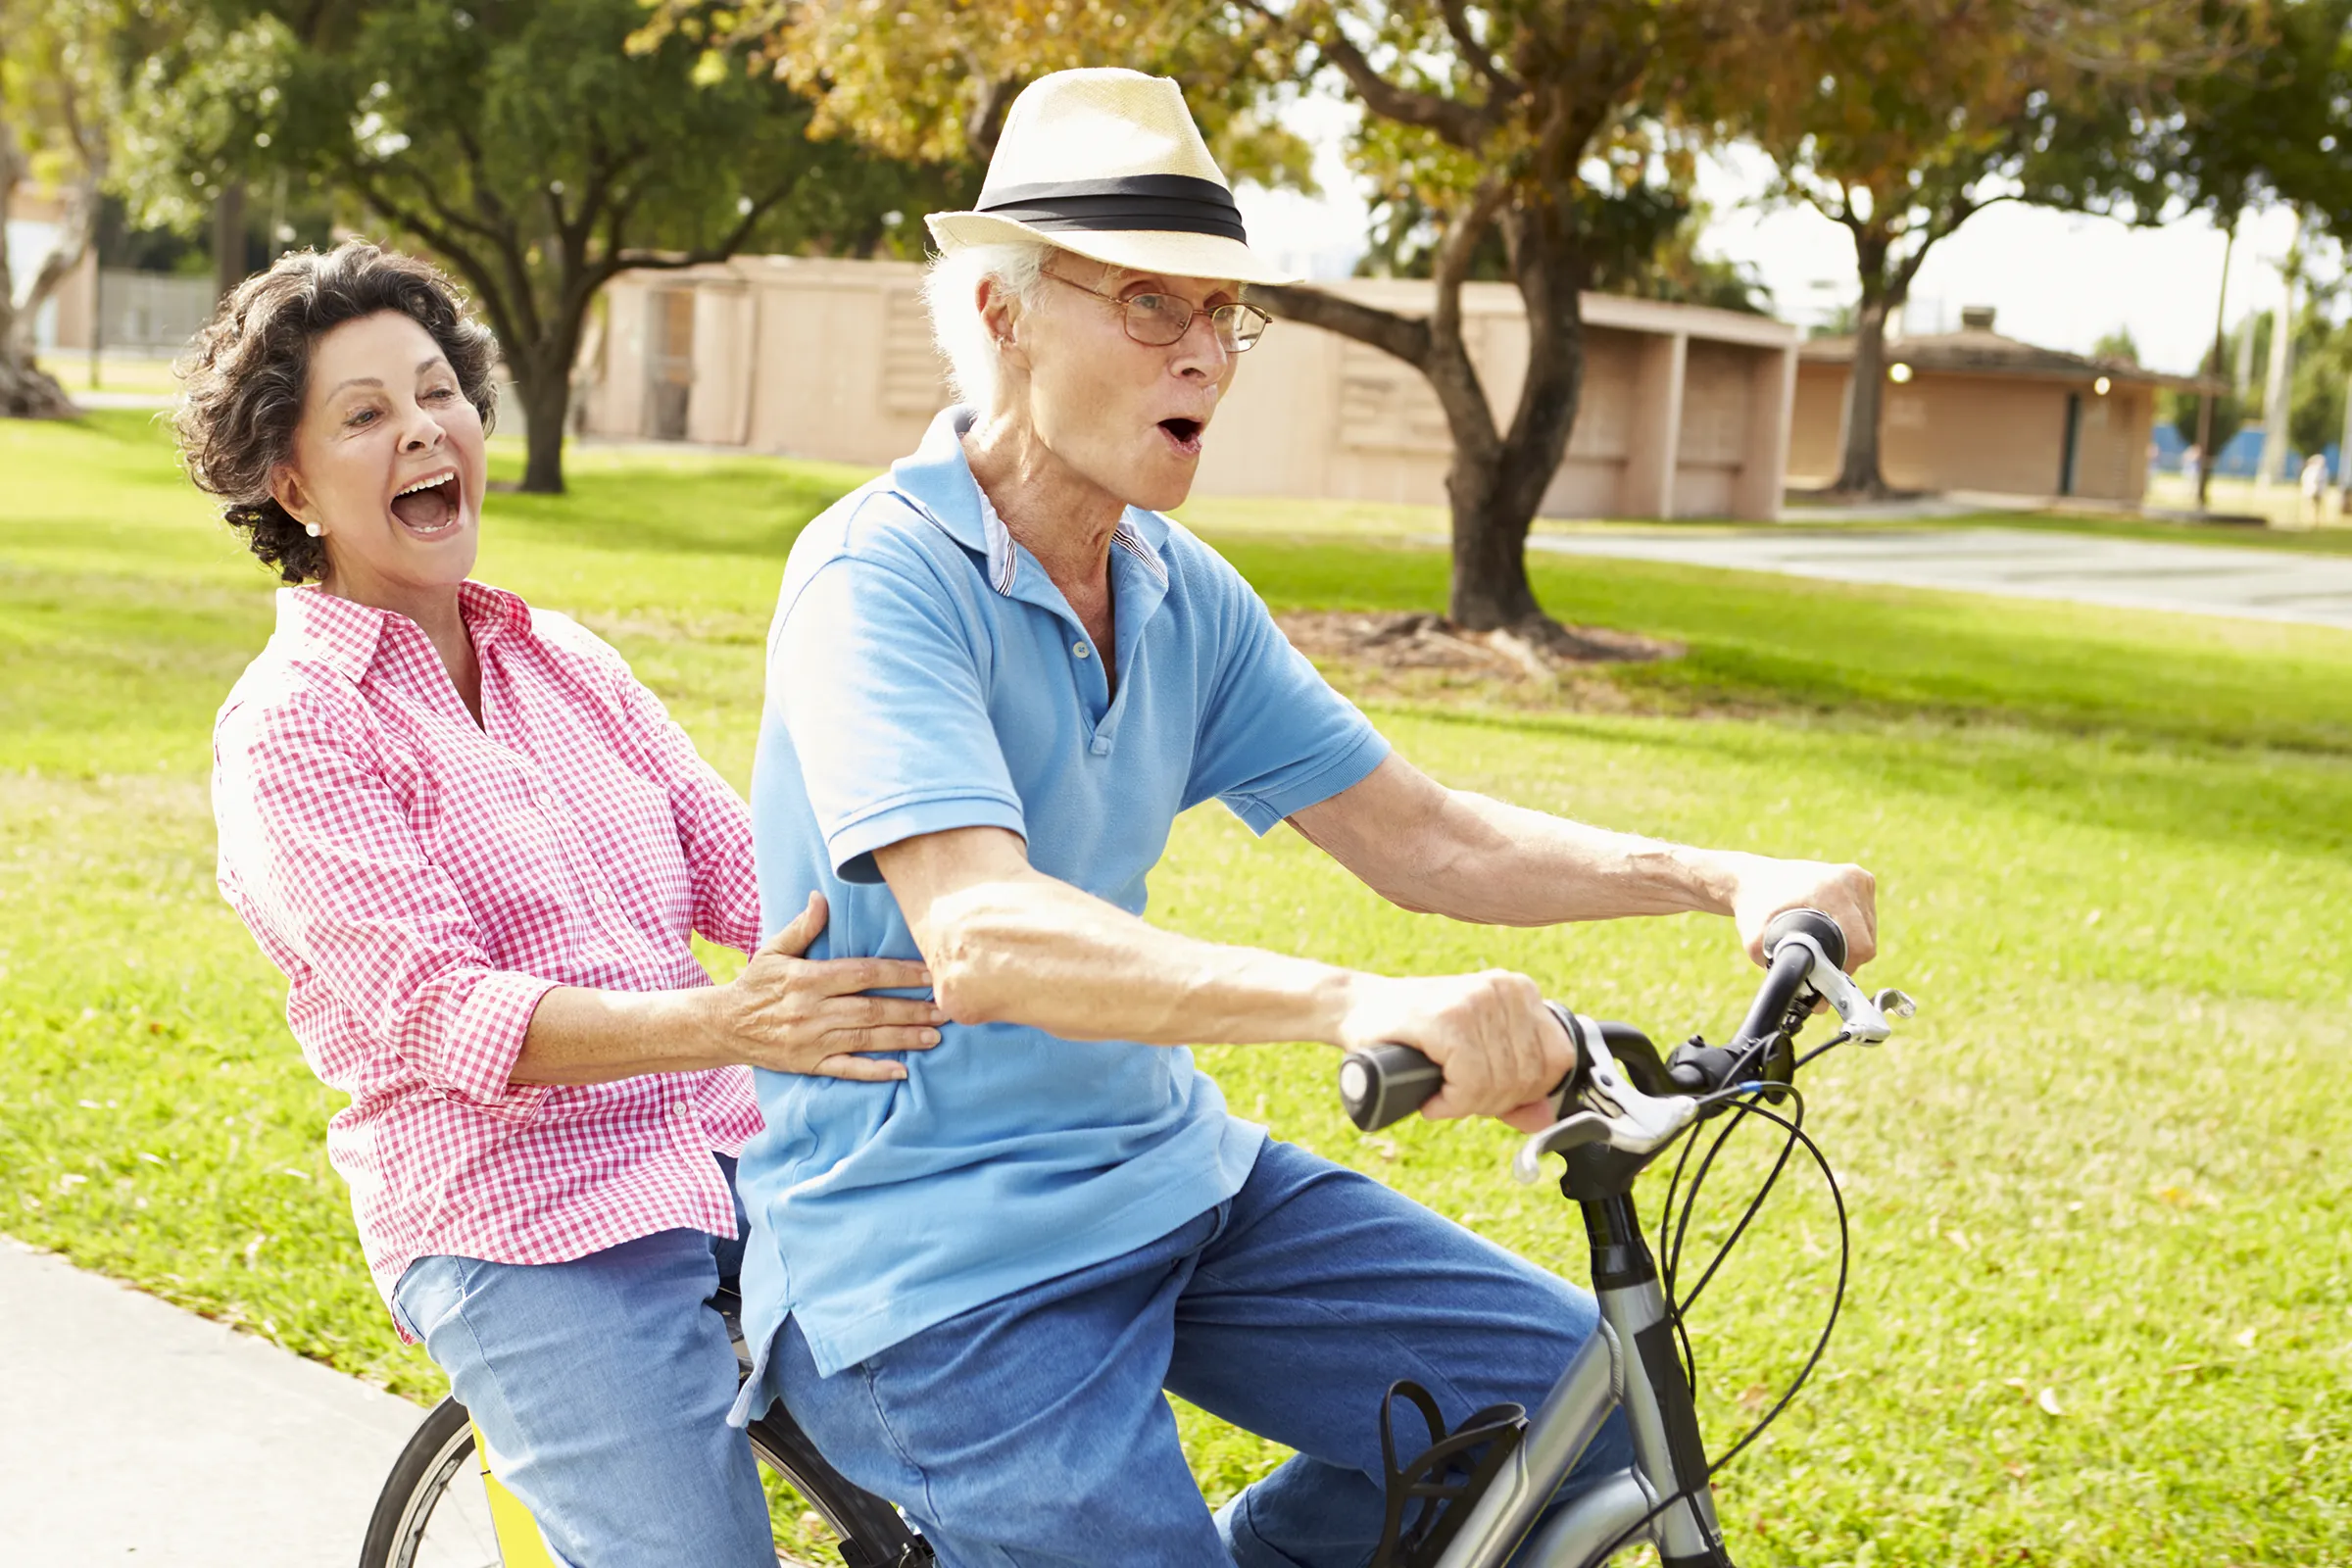 man and woman laughing on bike outside